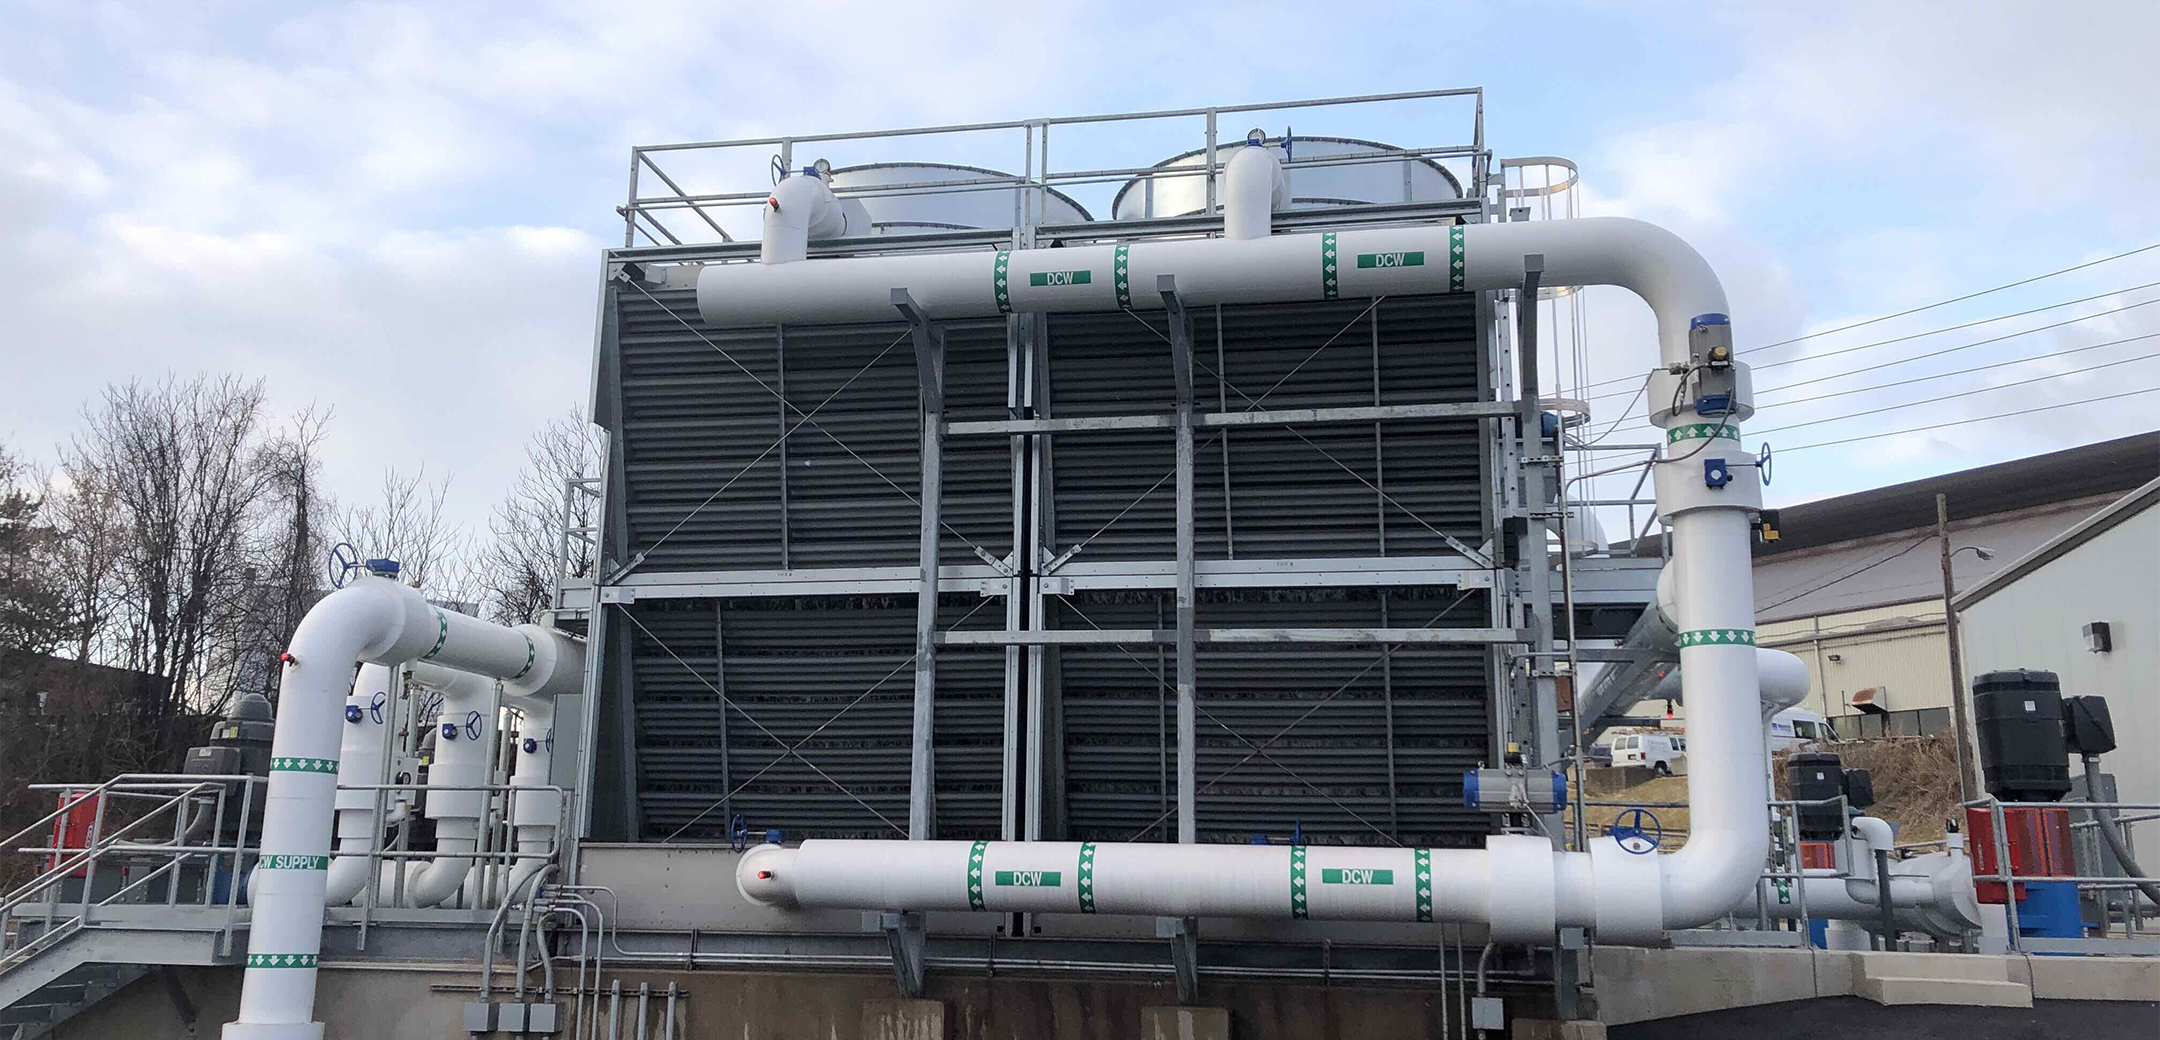 A close up view of the Recirculating Water Plant, showcasing the main tubes as well as the side radiator vents.